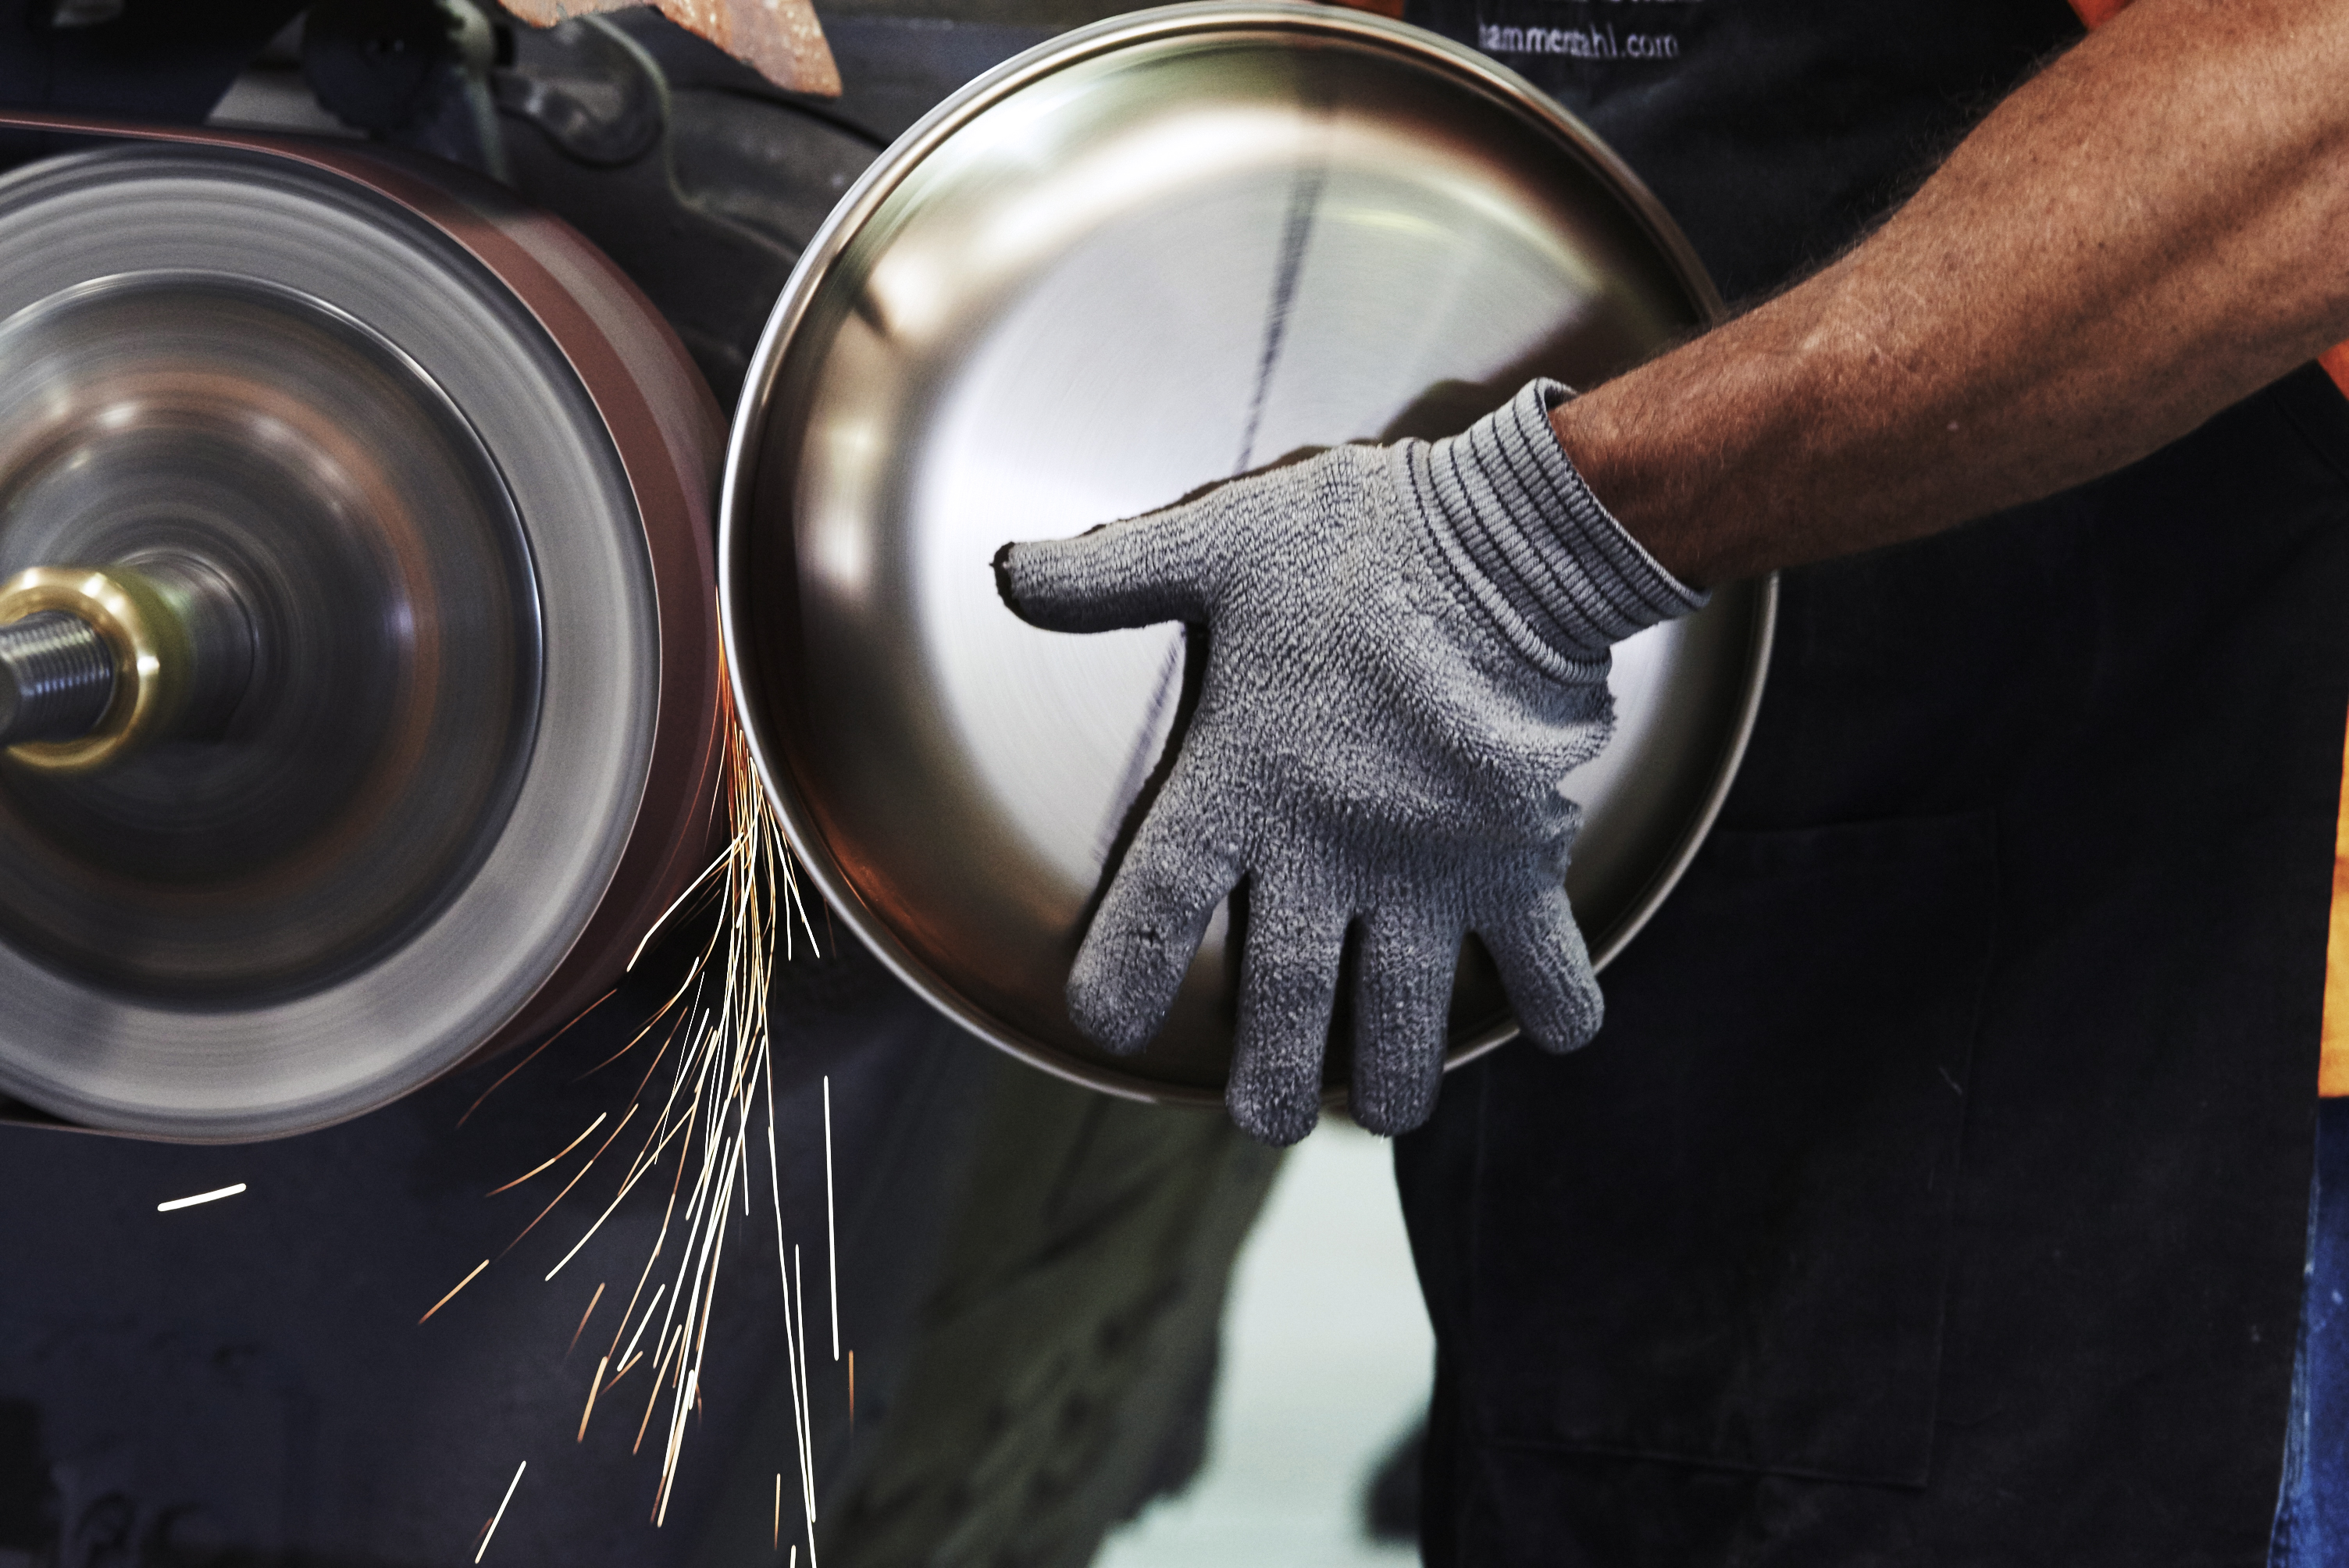 Made in America: How this company cooks up cookware across the U.S.A.